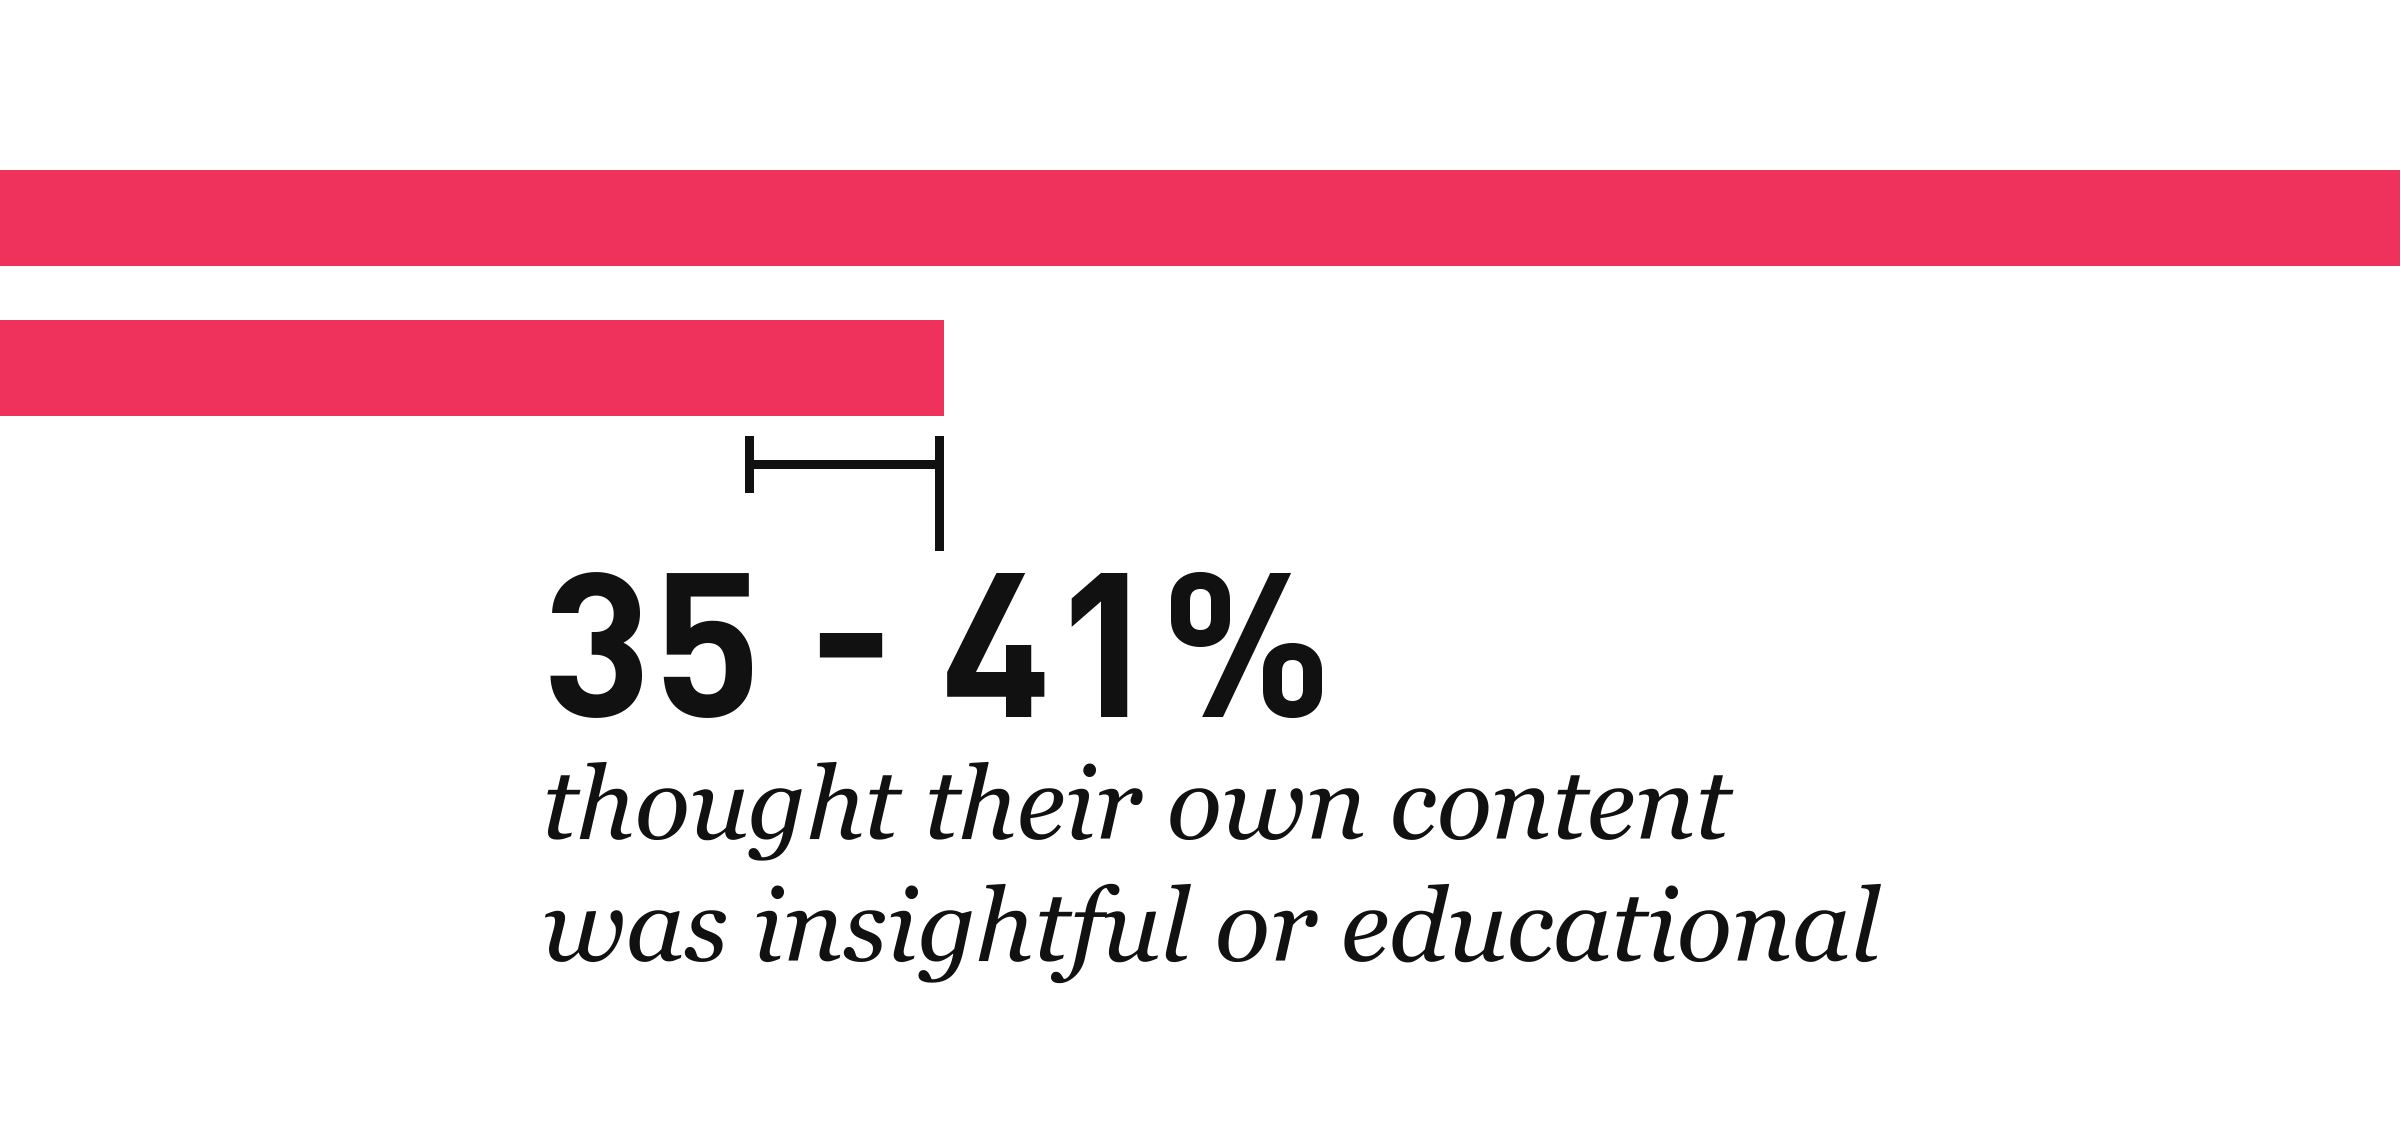 data-the-key-to-content-35-41-percent